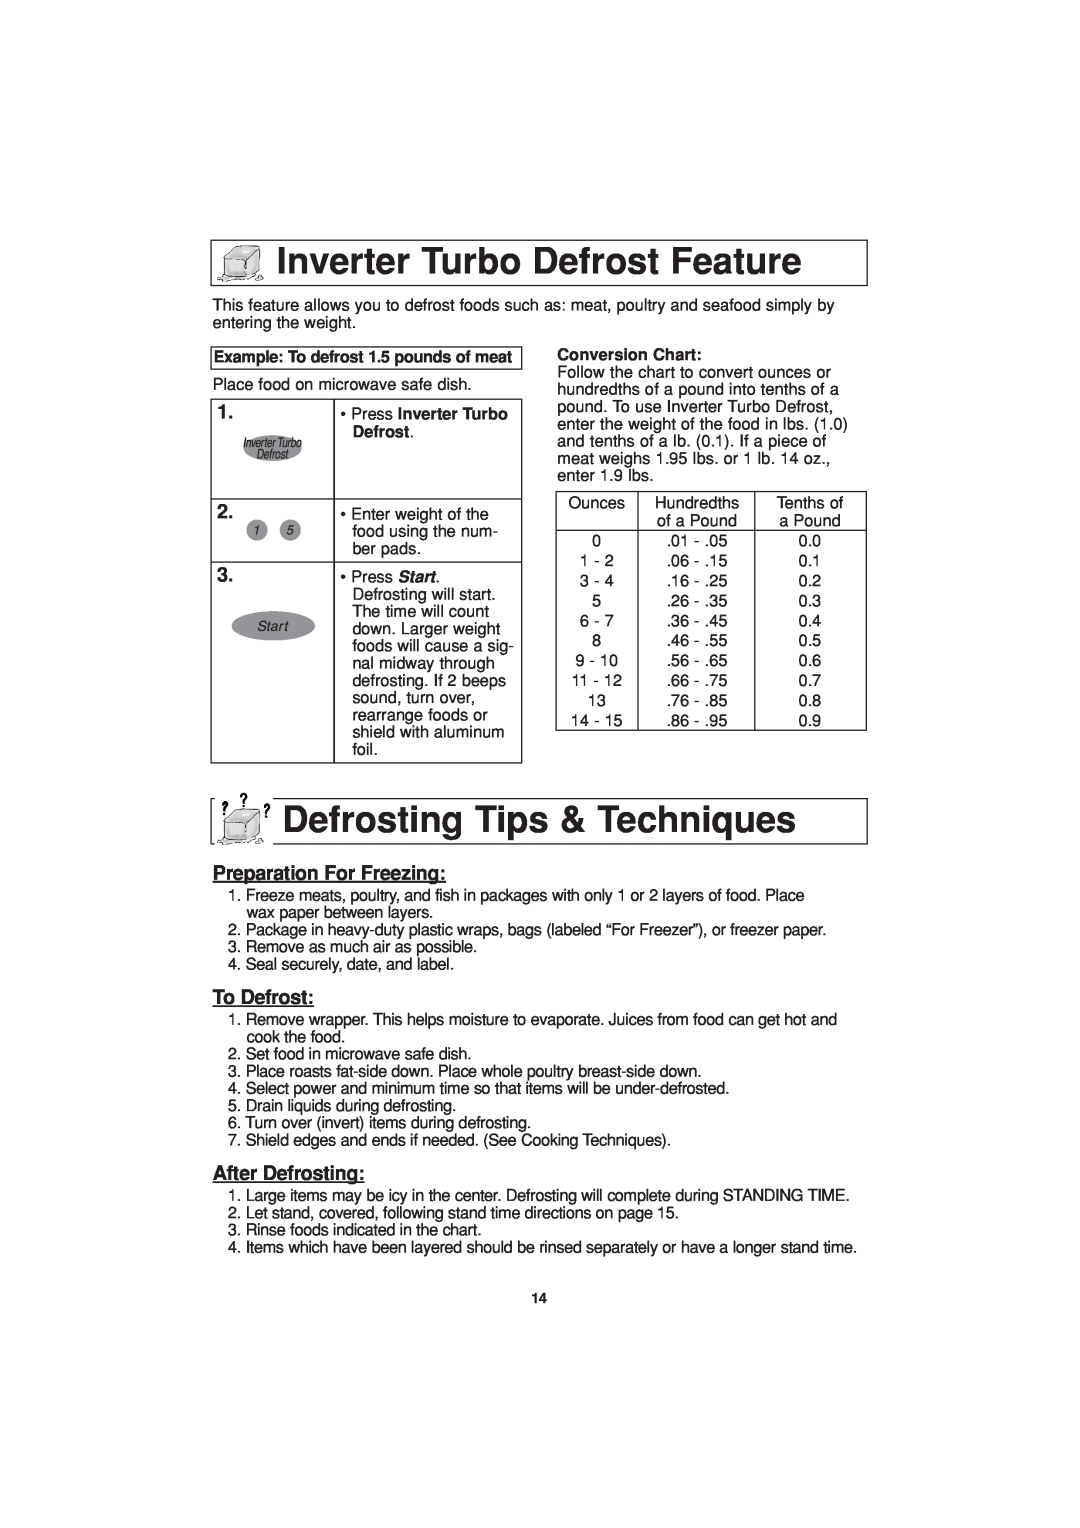 Panasonic NN-T694 Inverter Turbo Defrost Feature, Defrosting Tips & Techniques, Preparation For Freezing, To Defrost 